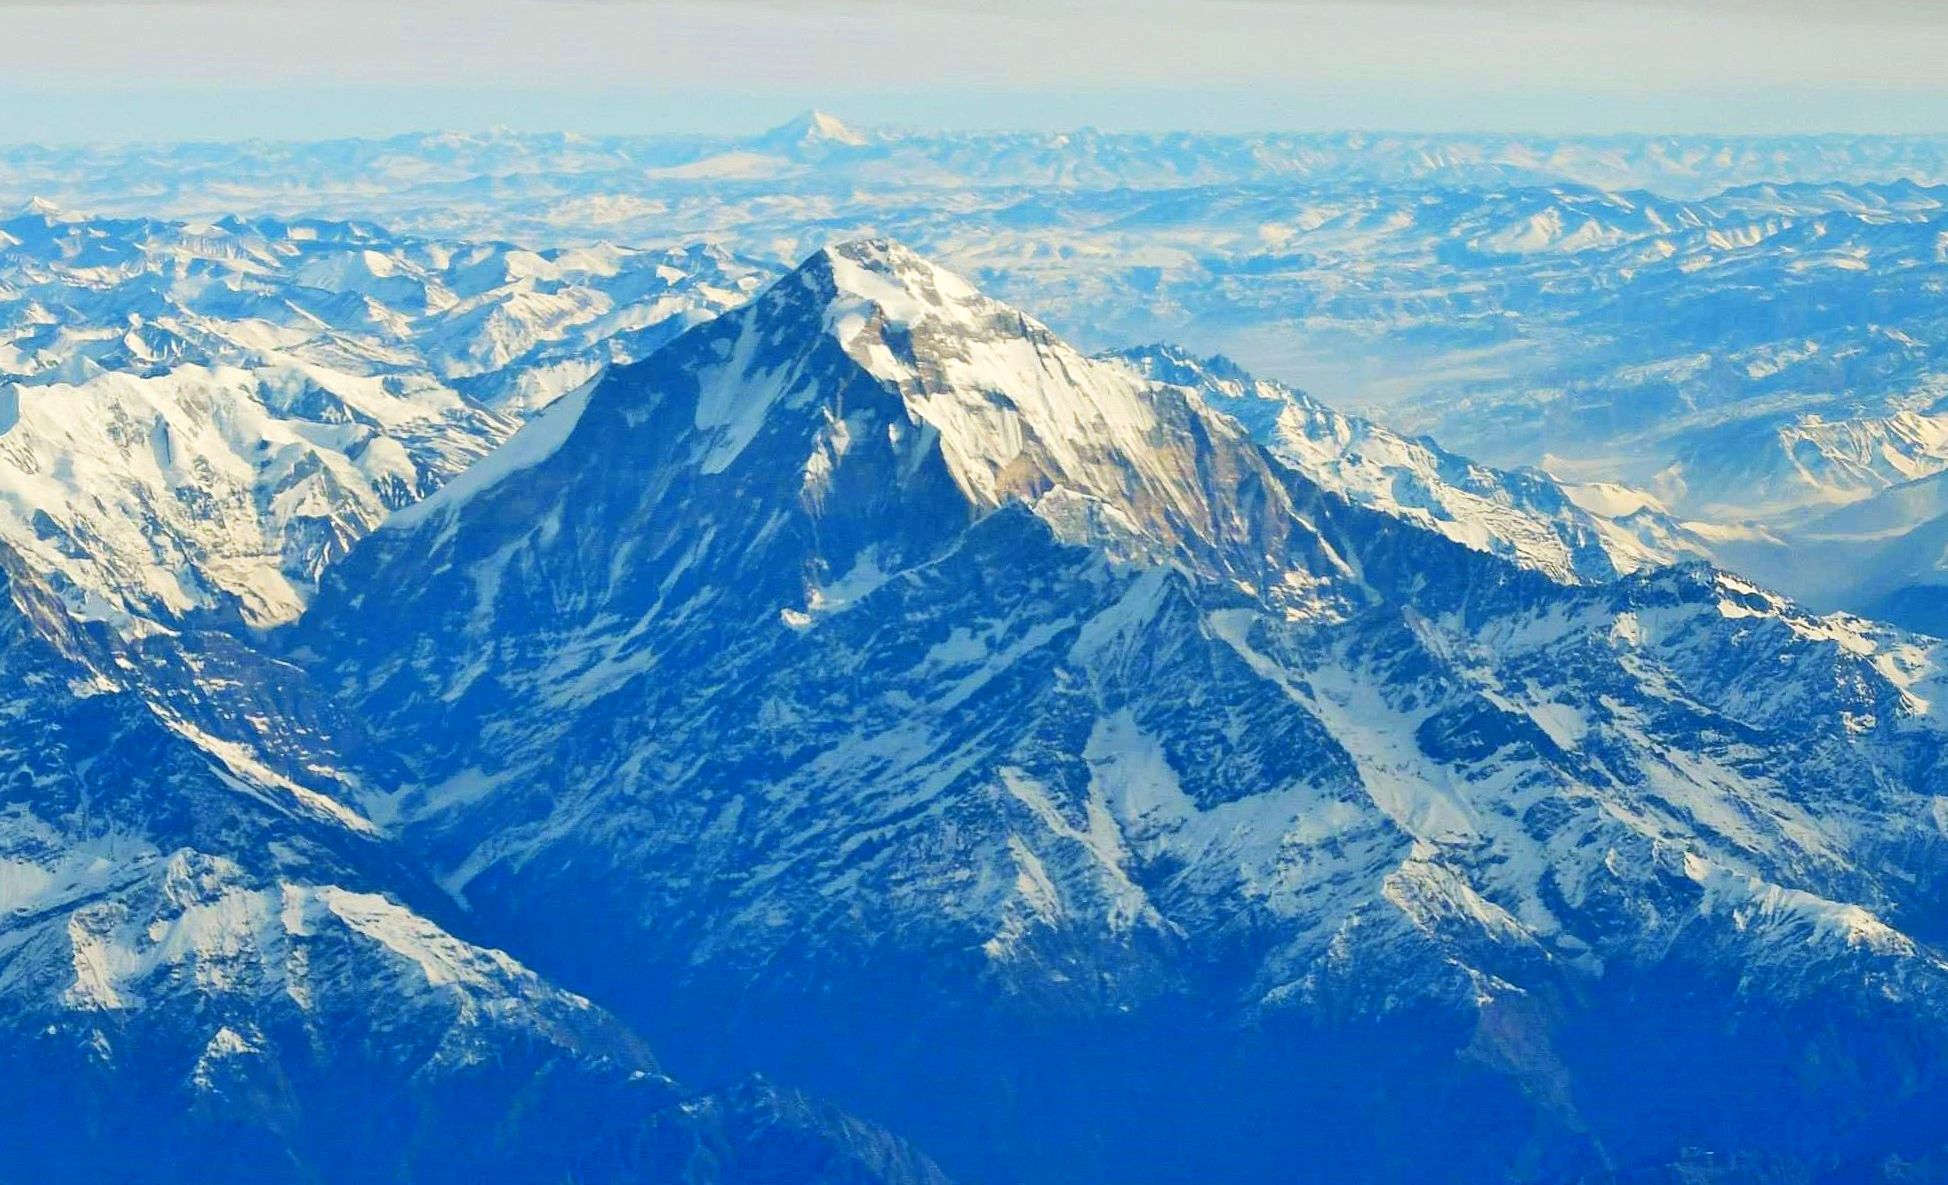 Aerial view of Denali ( Mount Mckinley ) in Alaska - the highest mountain in the USA and North America